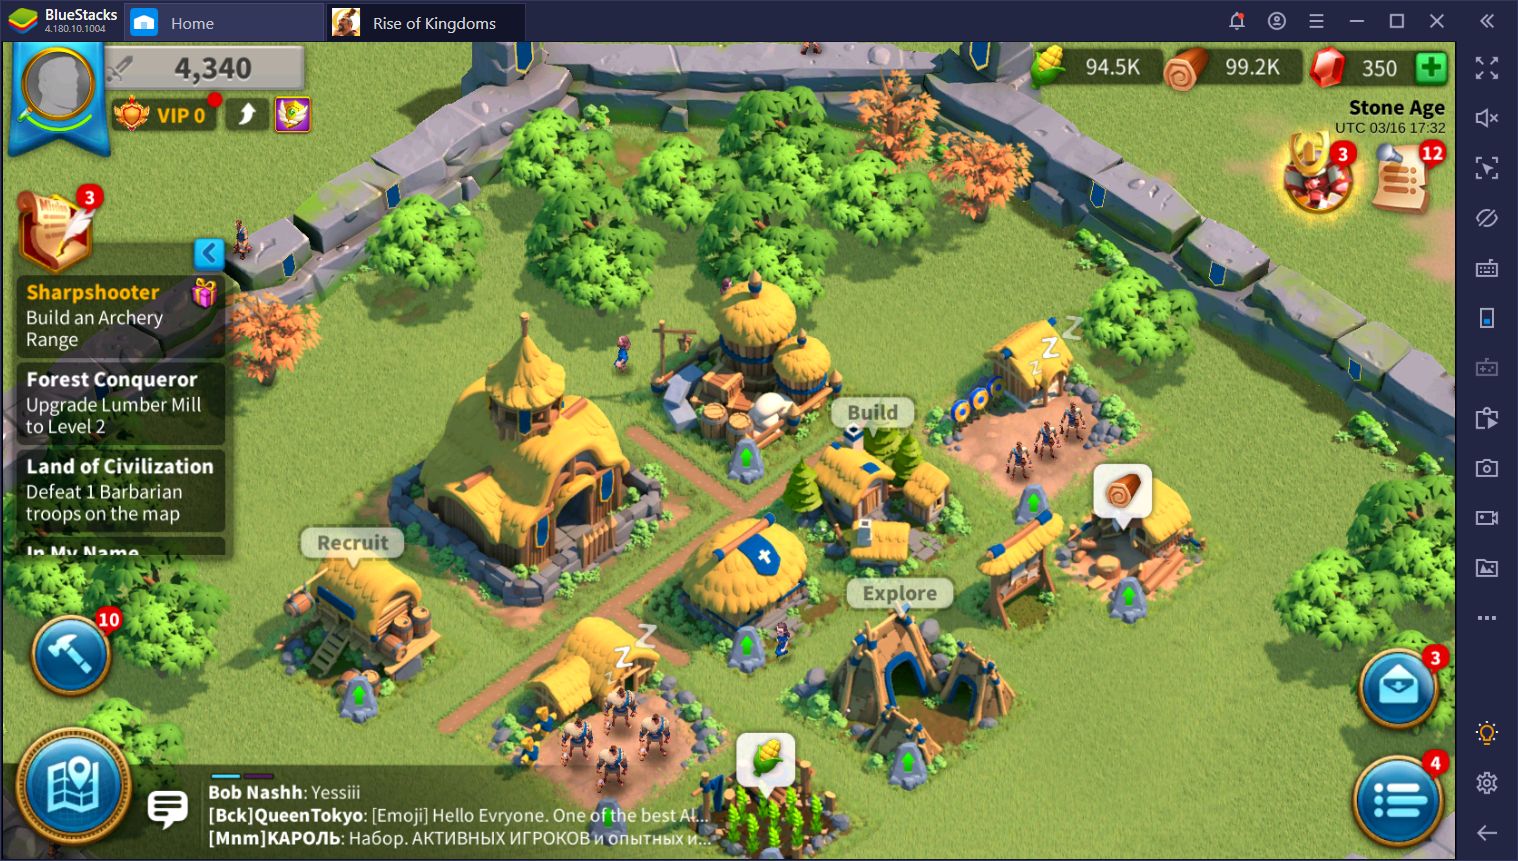 Rise of Kingdoms - Tips for Progressing as a Free-to-Play Player